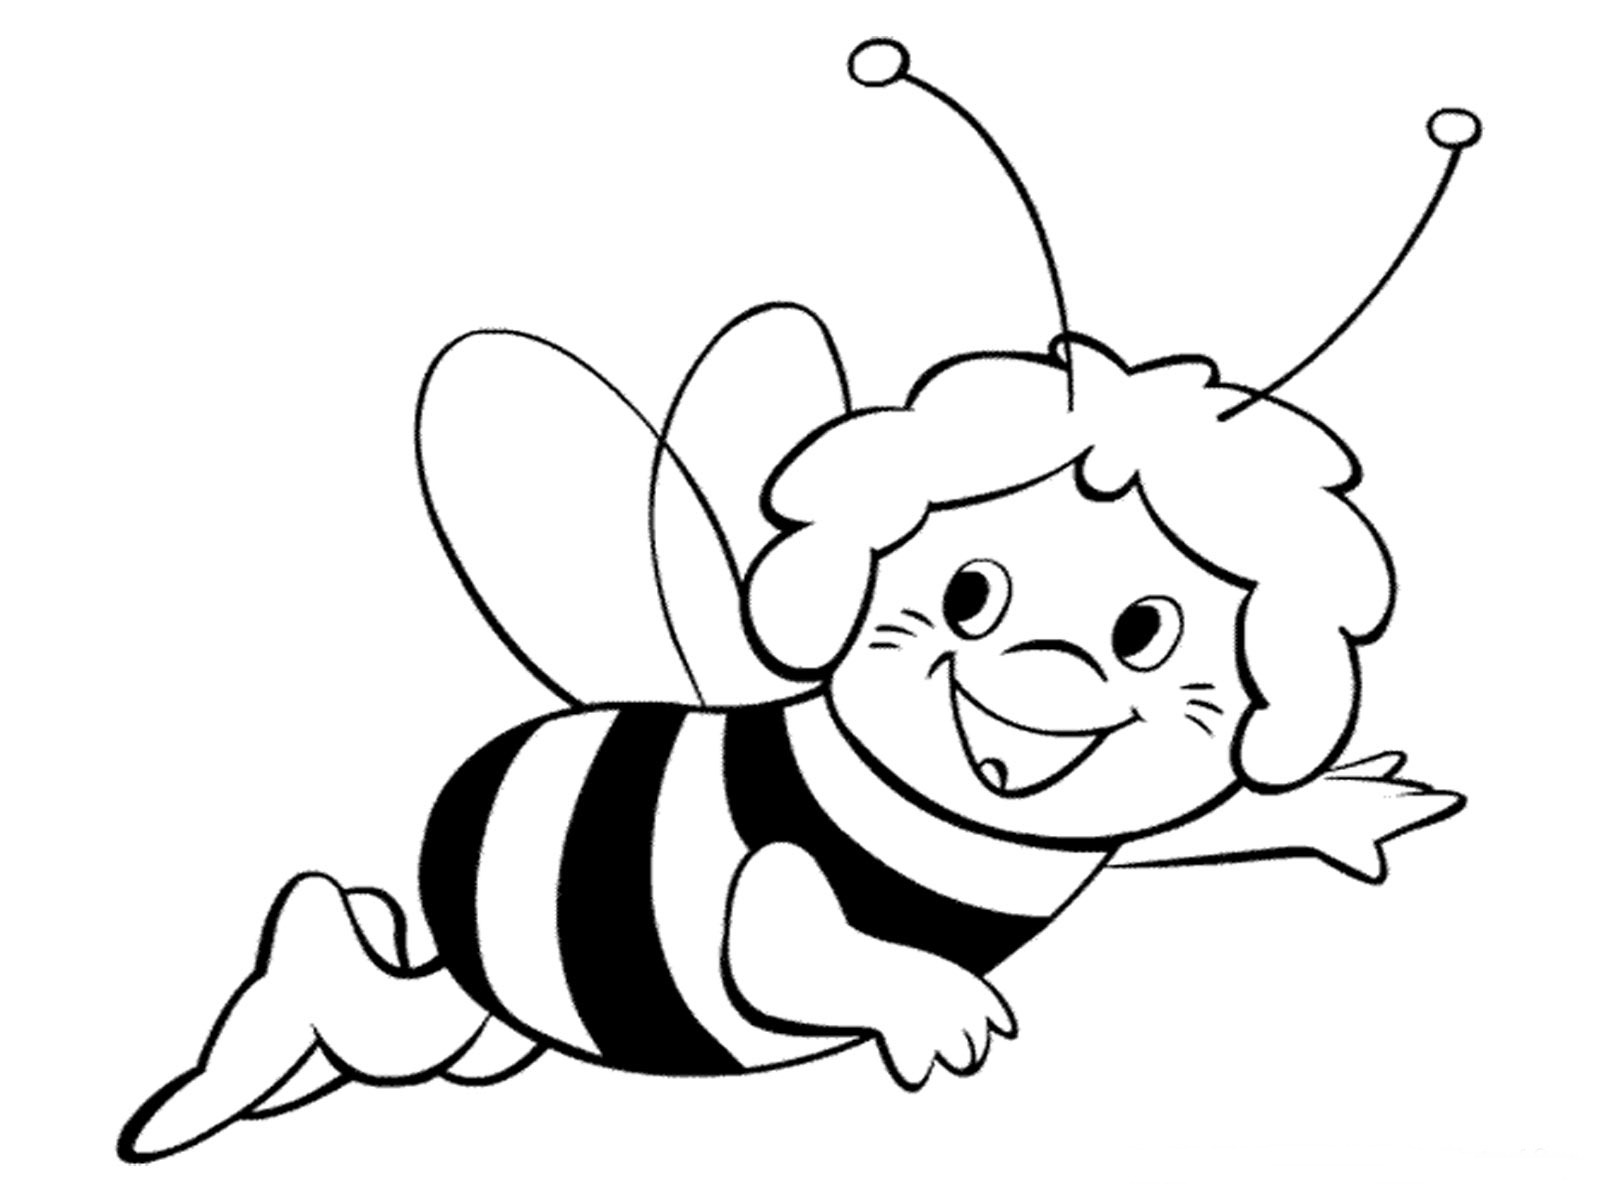 Coloring Pages Of Bees. bee colouring pages page 3. bees coloring ...